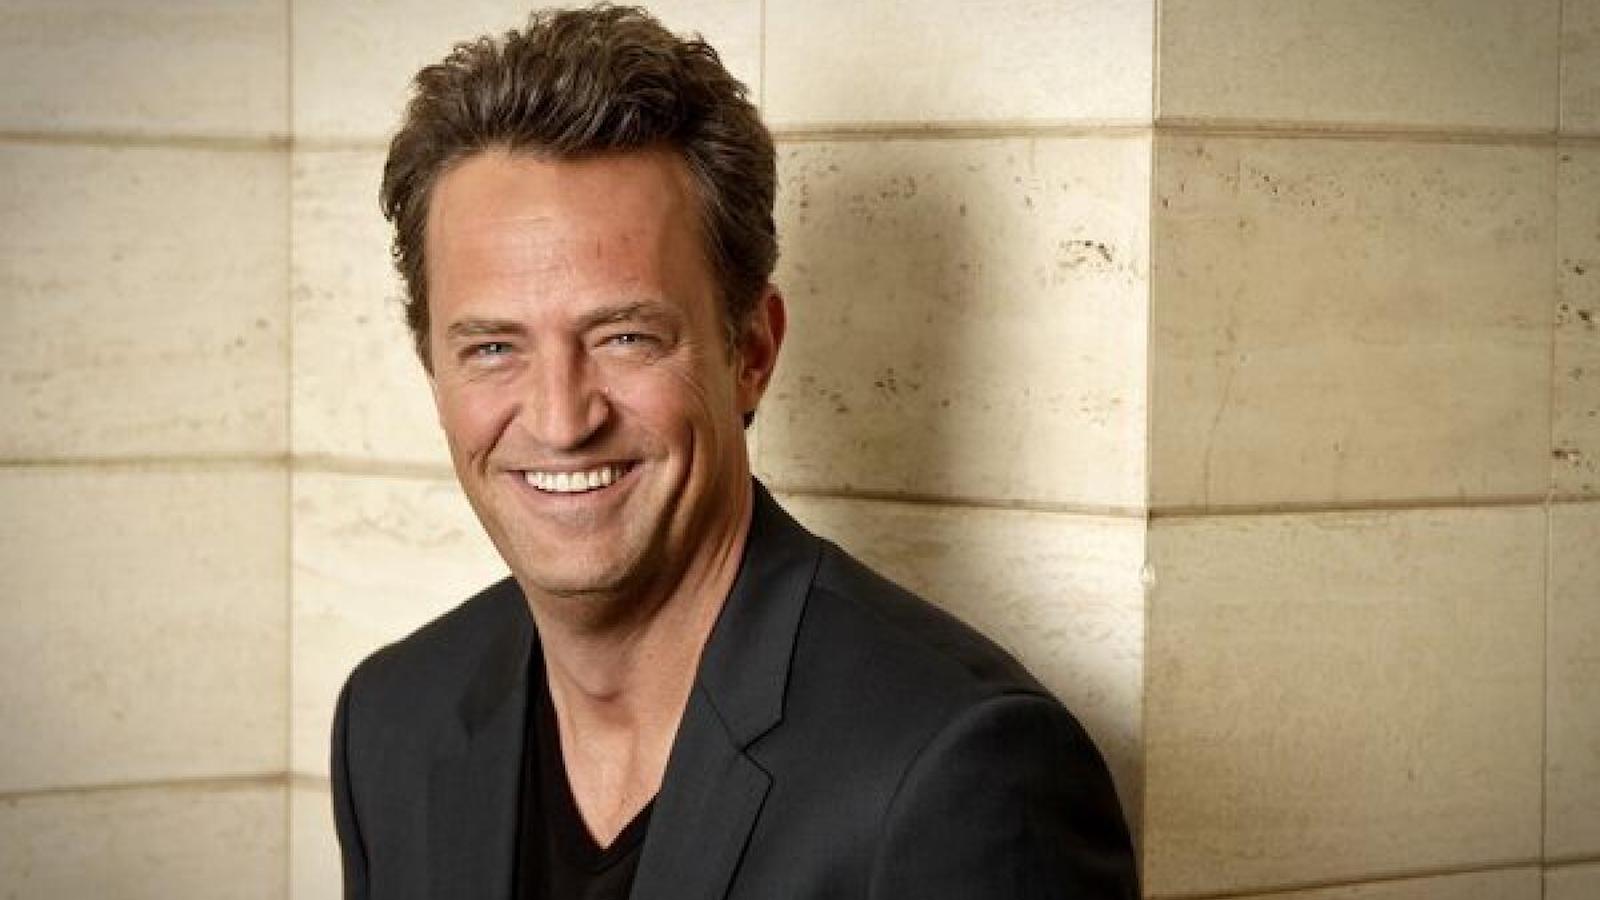 Could that be more painful? In memoria di Matthew Perry